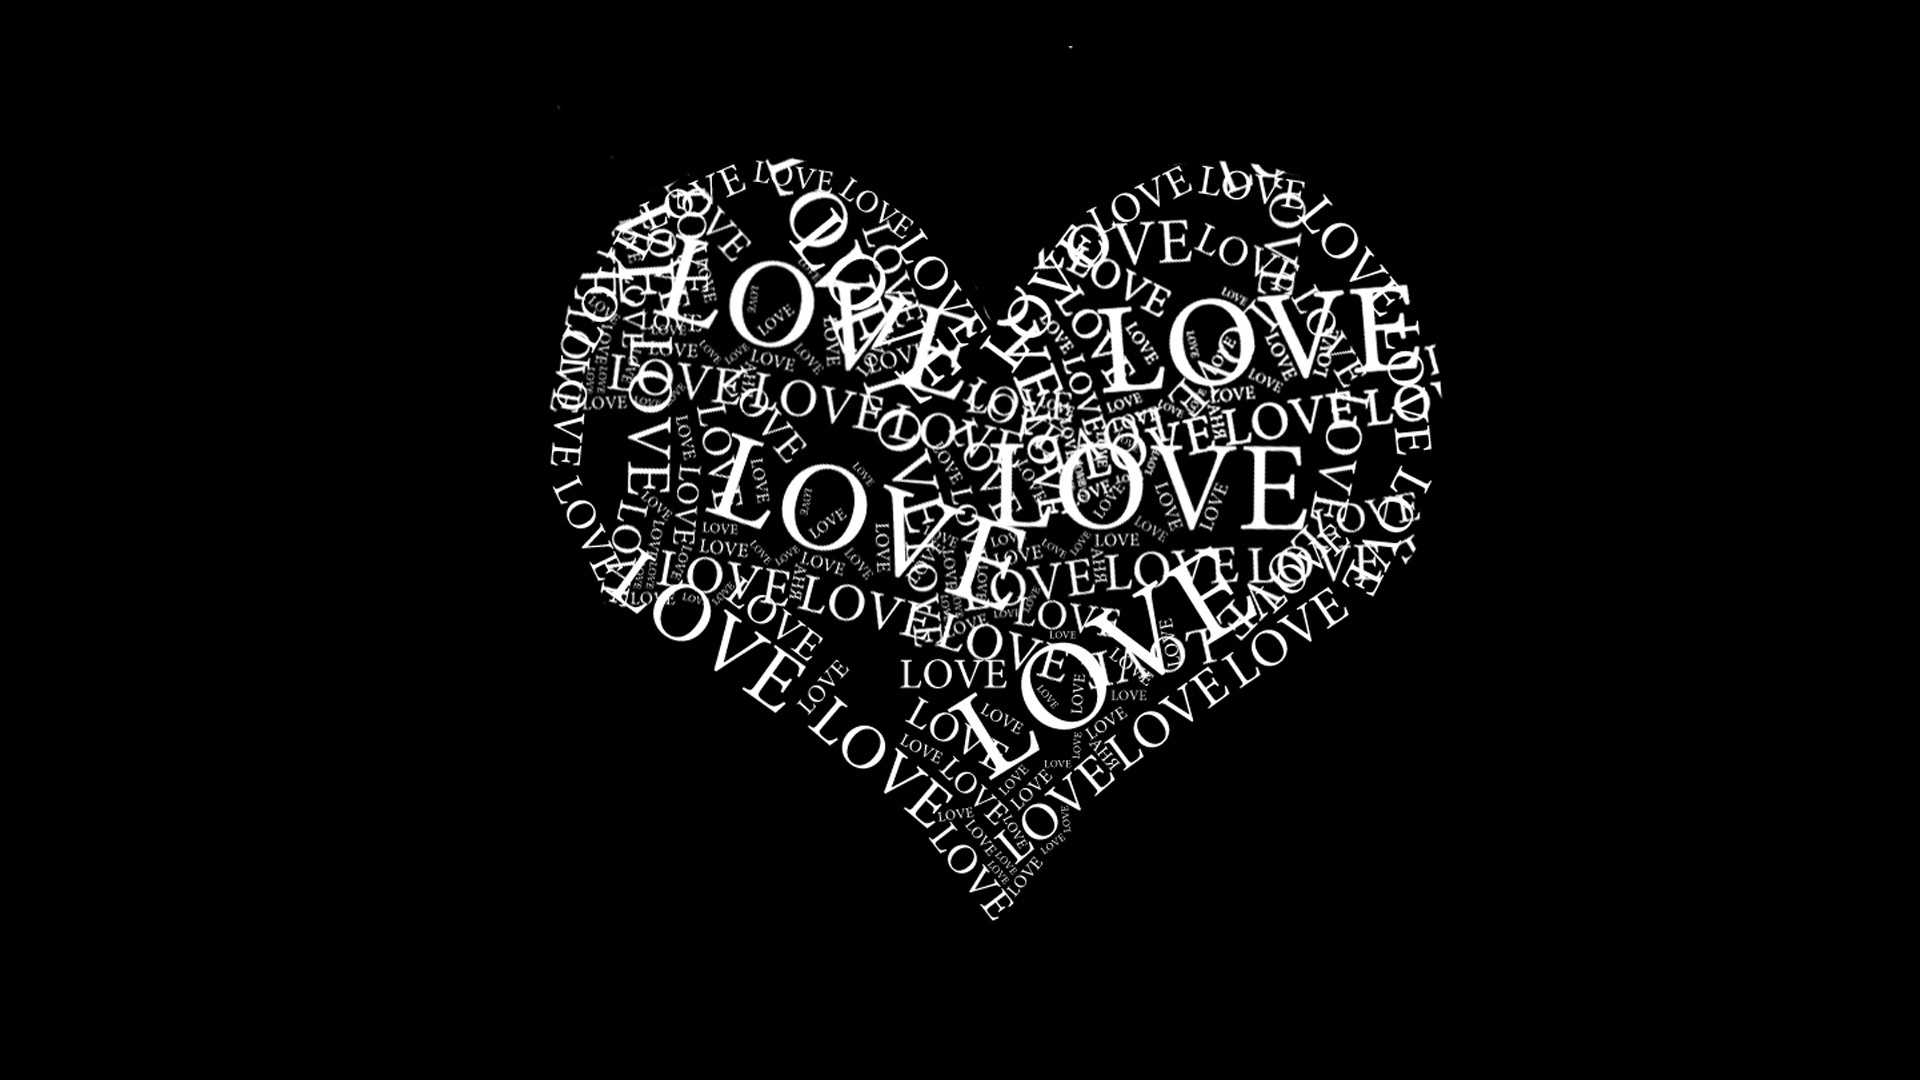 The Word Love In Black And White Wallpaper 1080p I HD Image